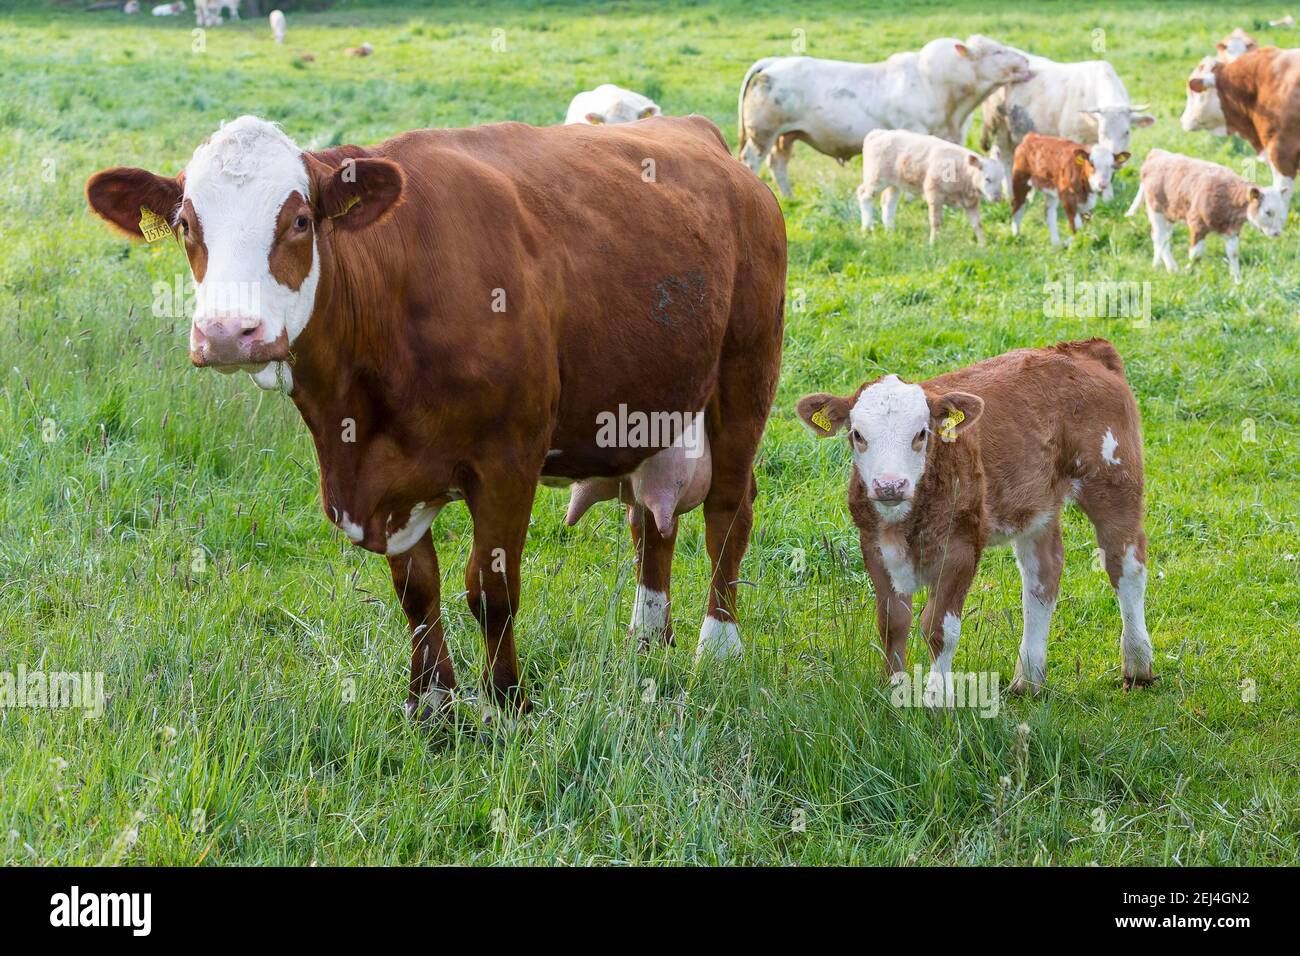 Cattle (Bovini) on a pasture, mother with calf, Elbland, Saxony, Germany Stock Photo